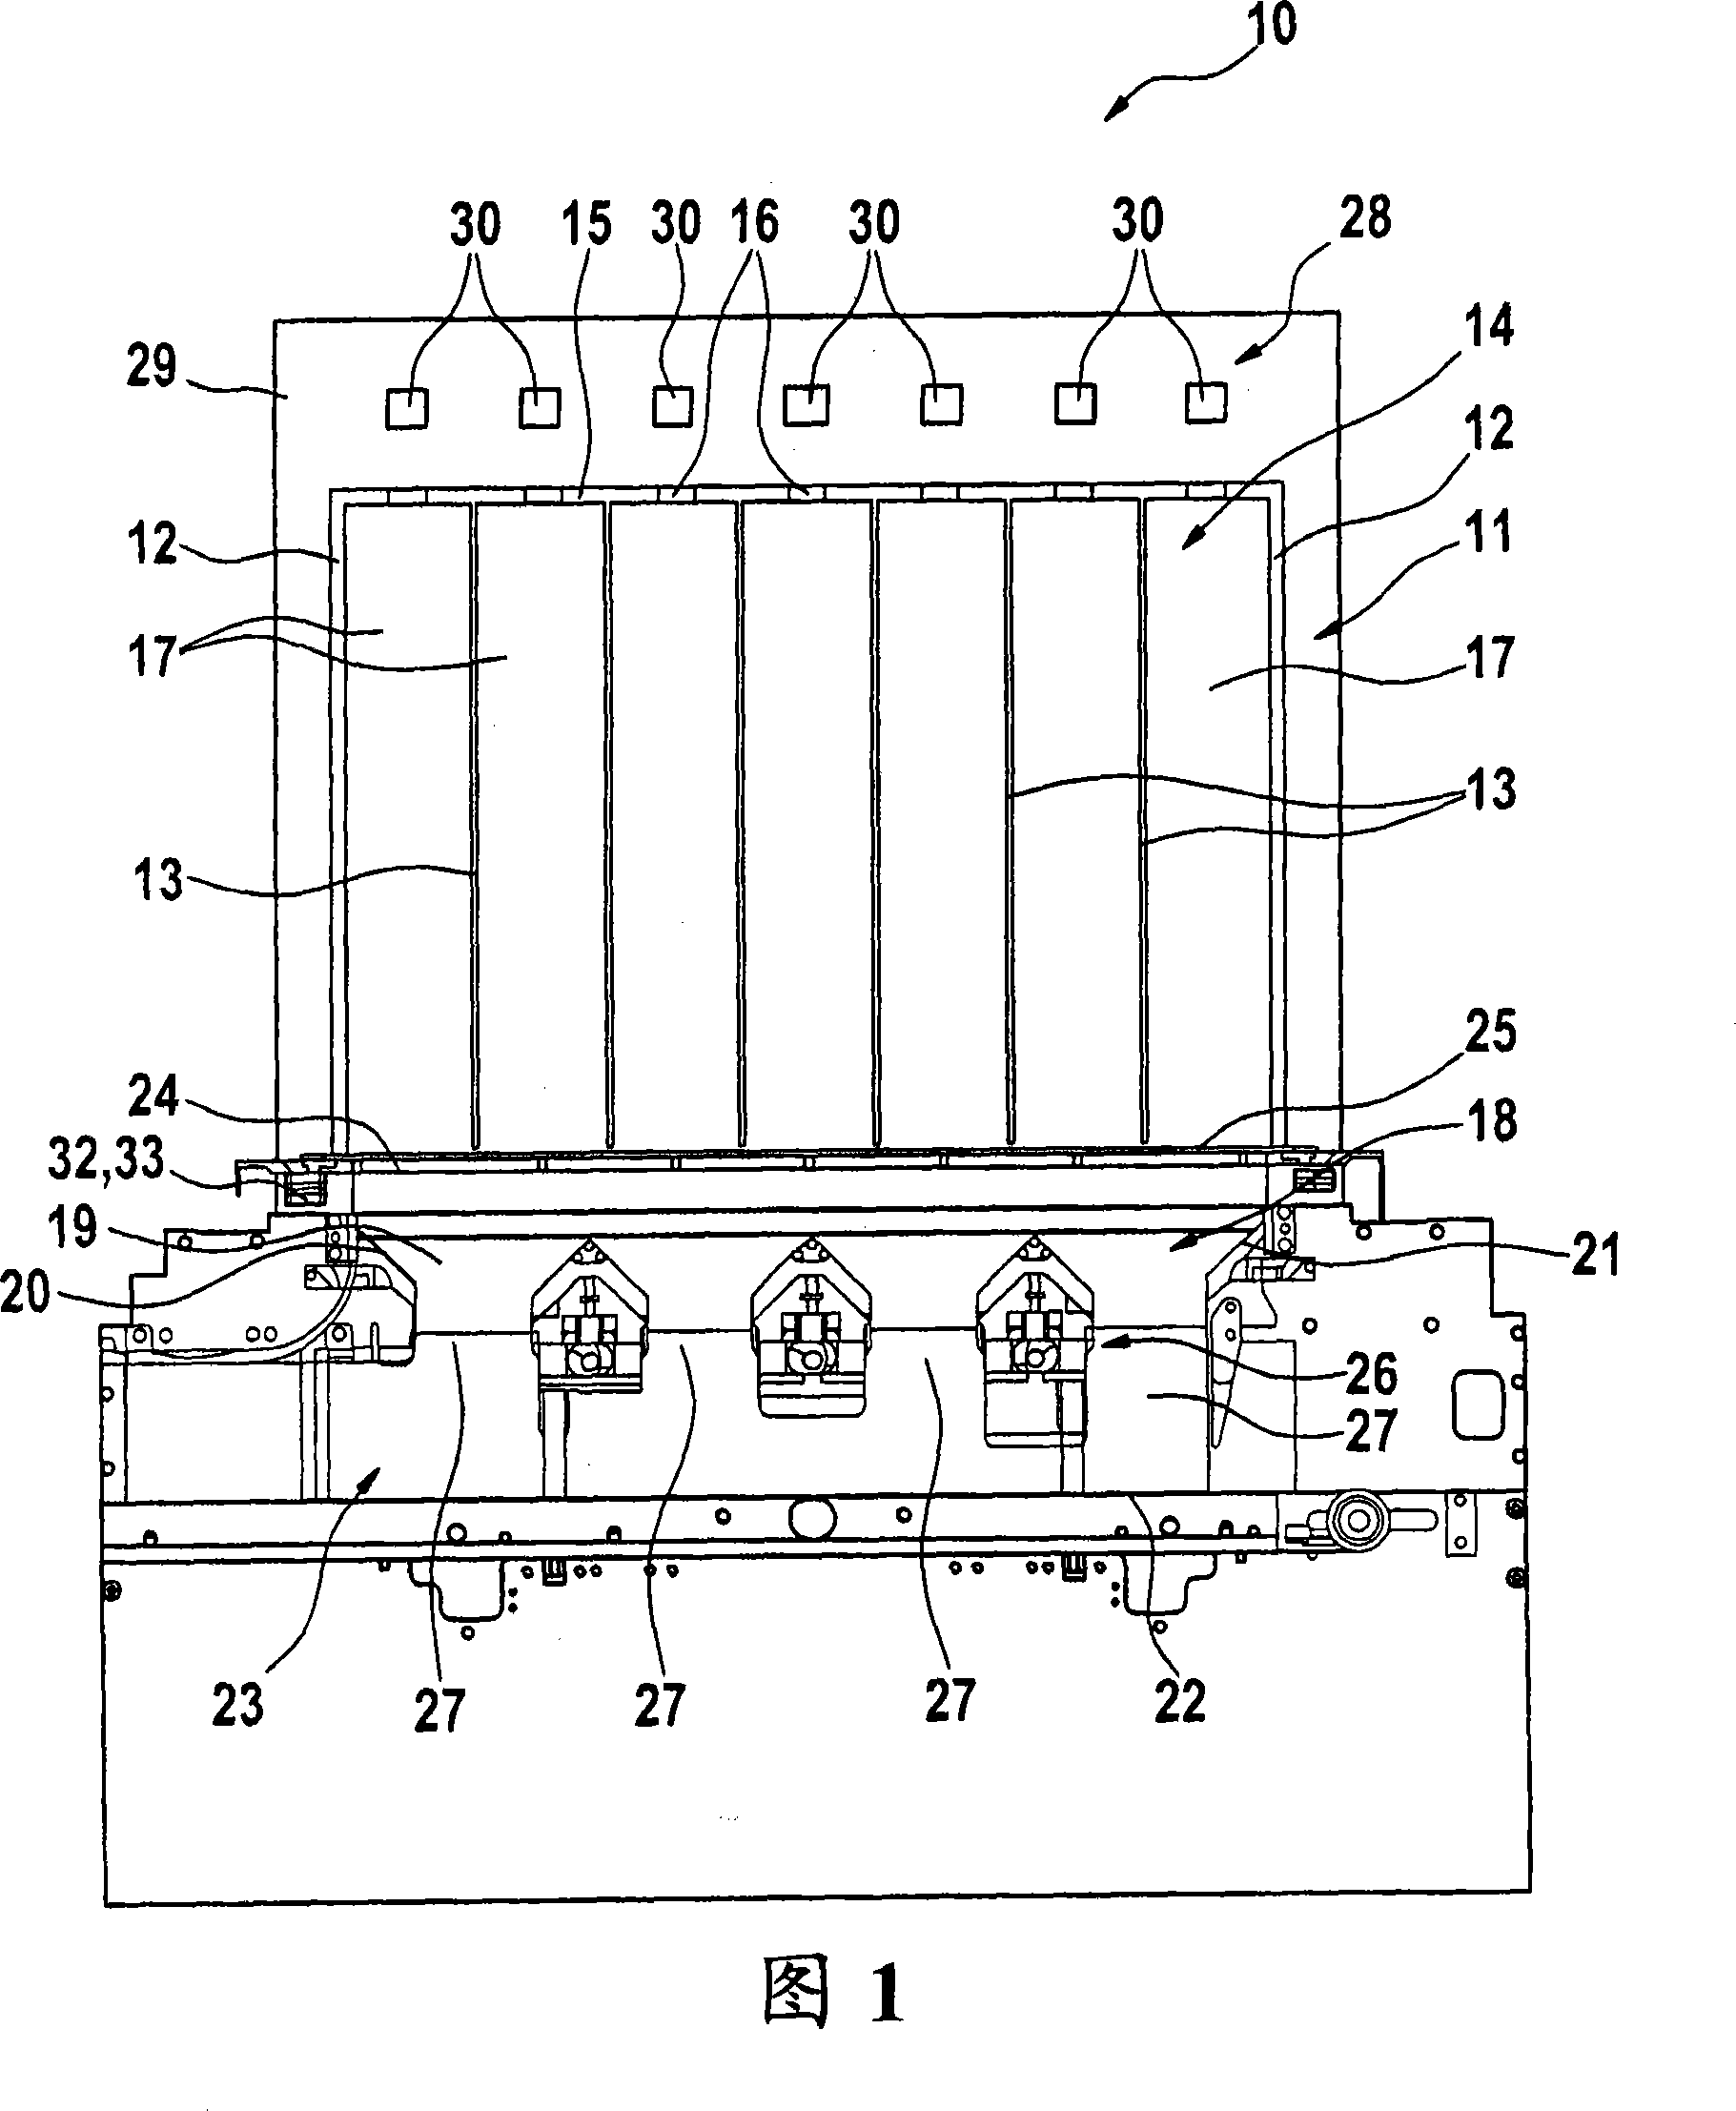 Discharge hopper and method of discharing trays filled with rod-shaped articles